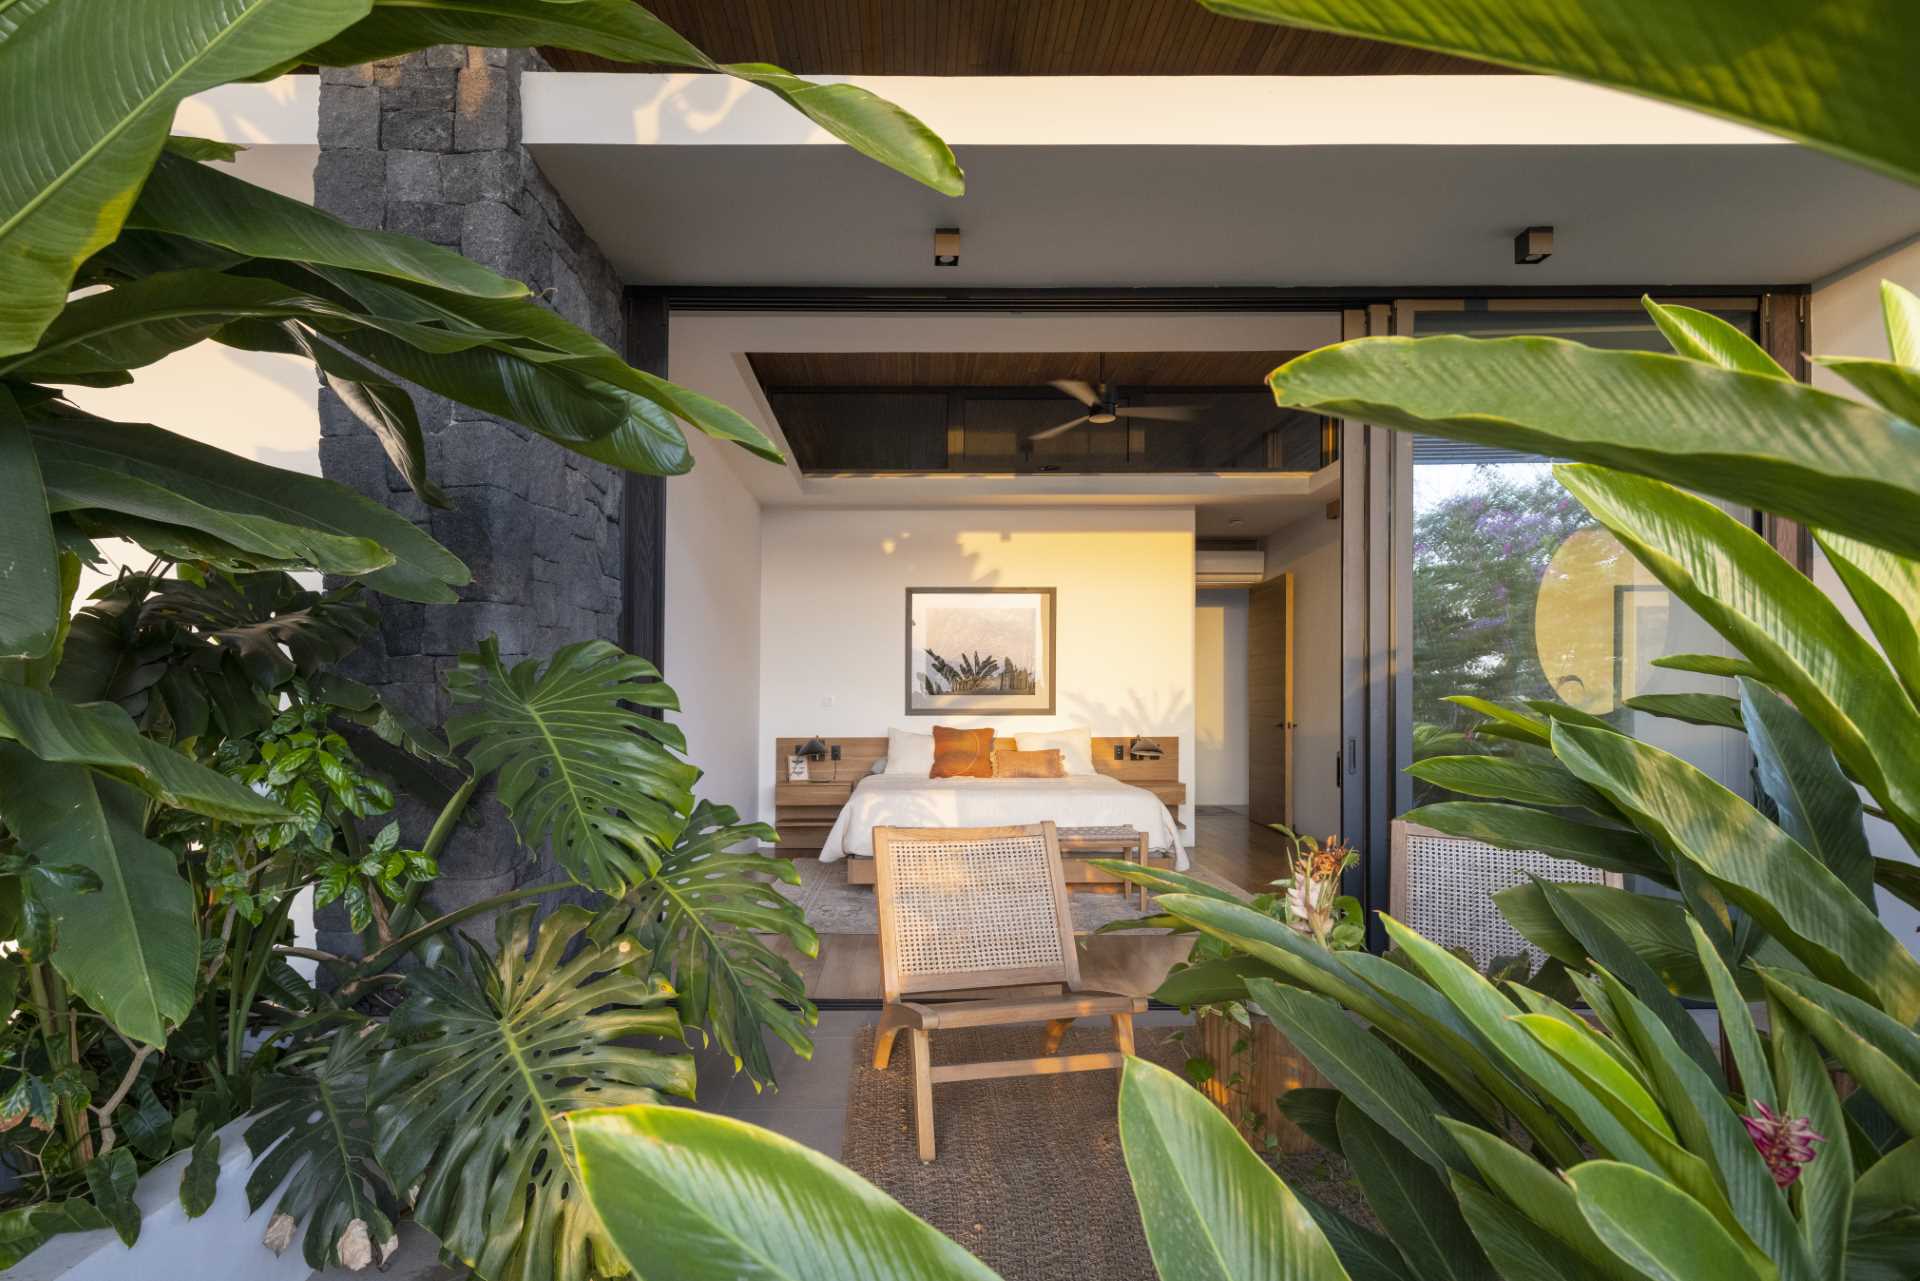 A bedroom with a sliding door opens to a private patio filled with plants.